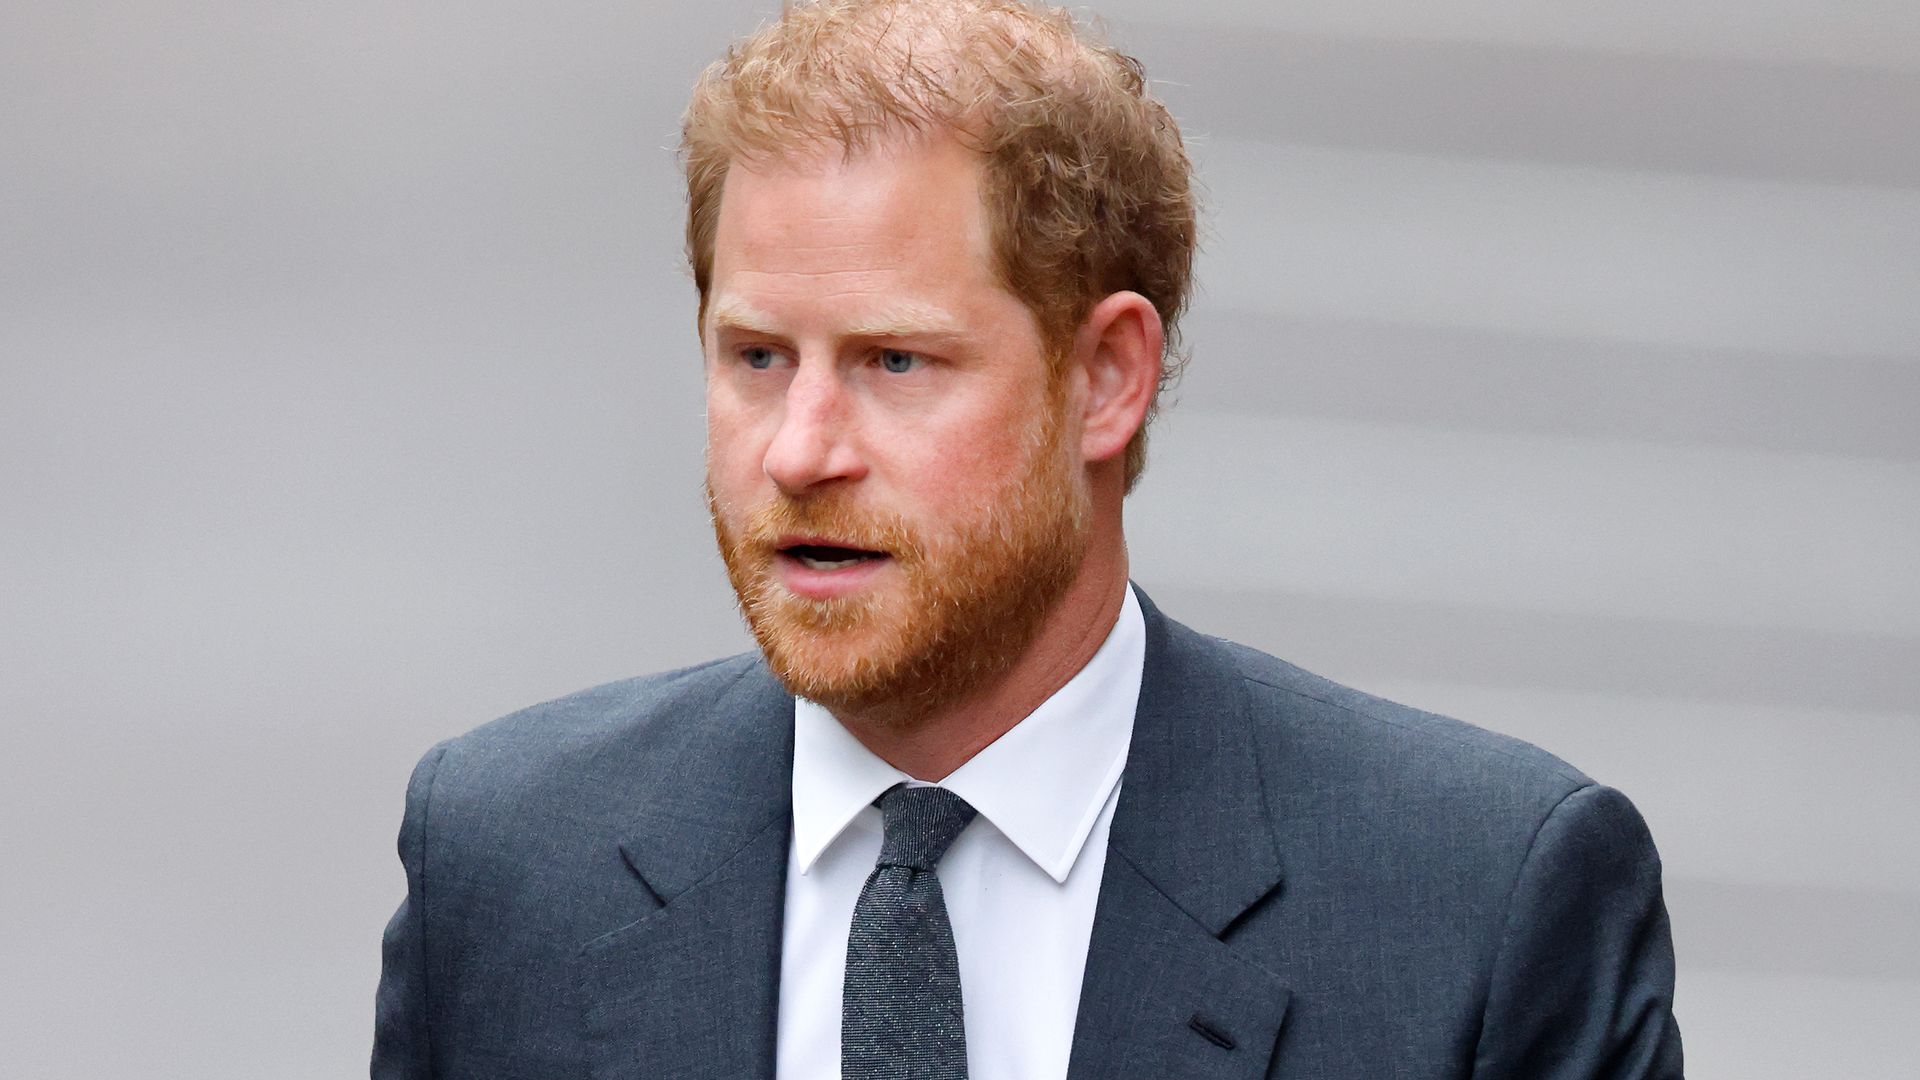 Prince Harry pictured arriving at the Royal Courts of Justice earlier in March 